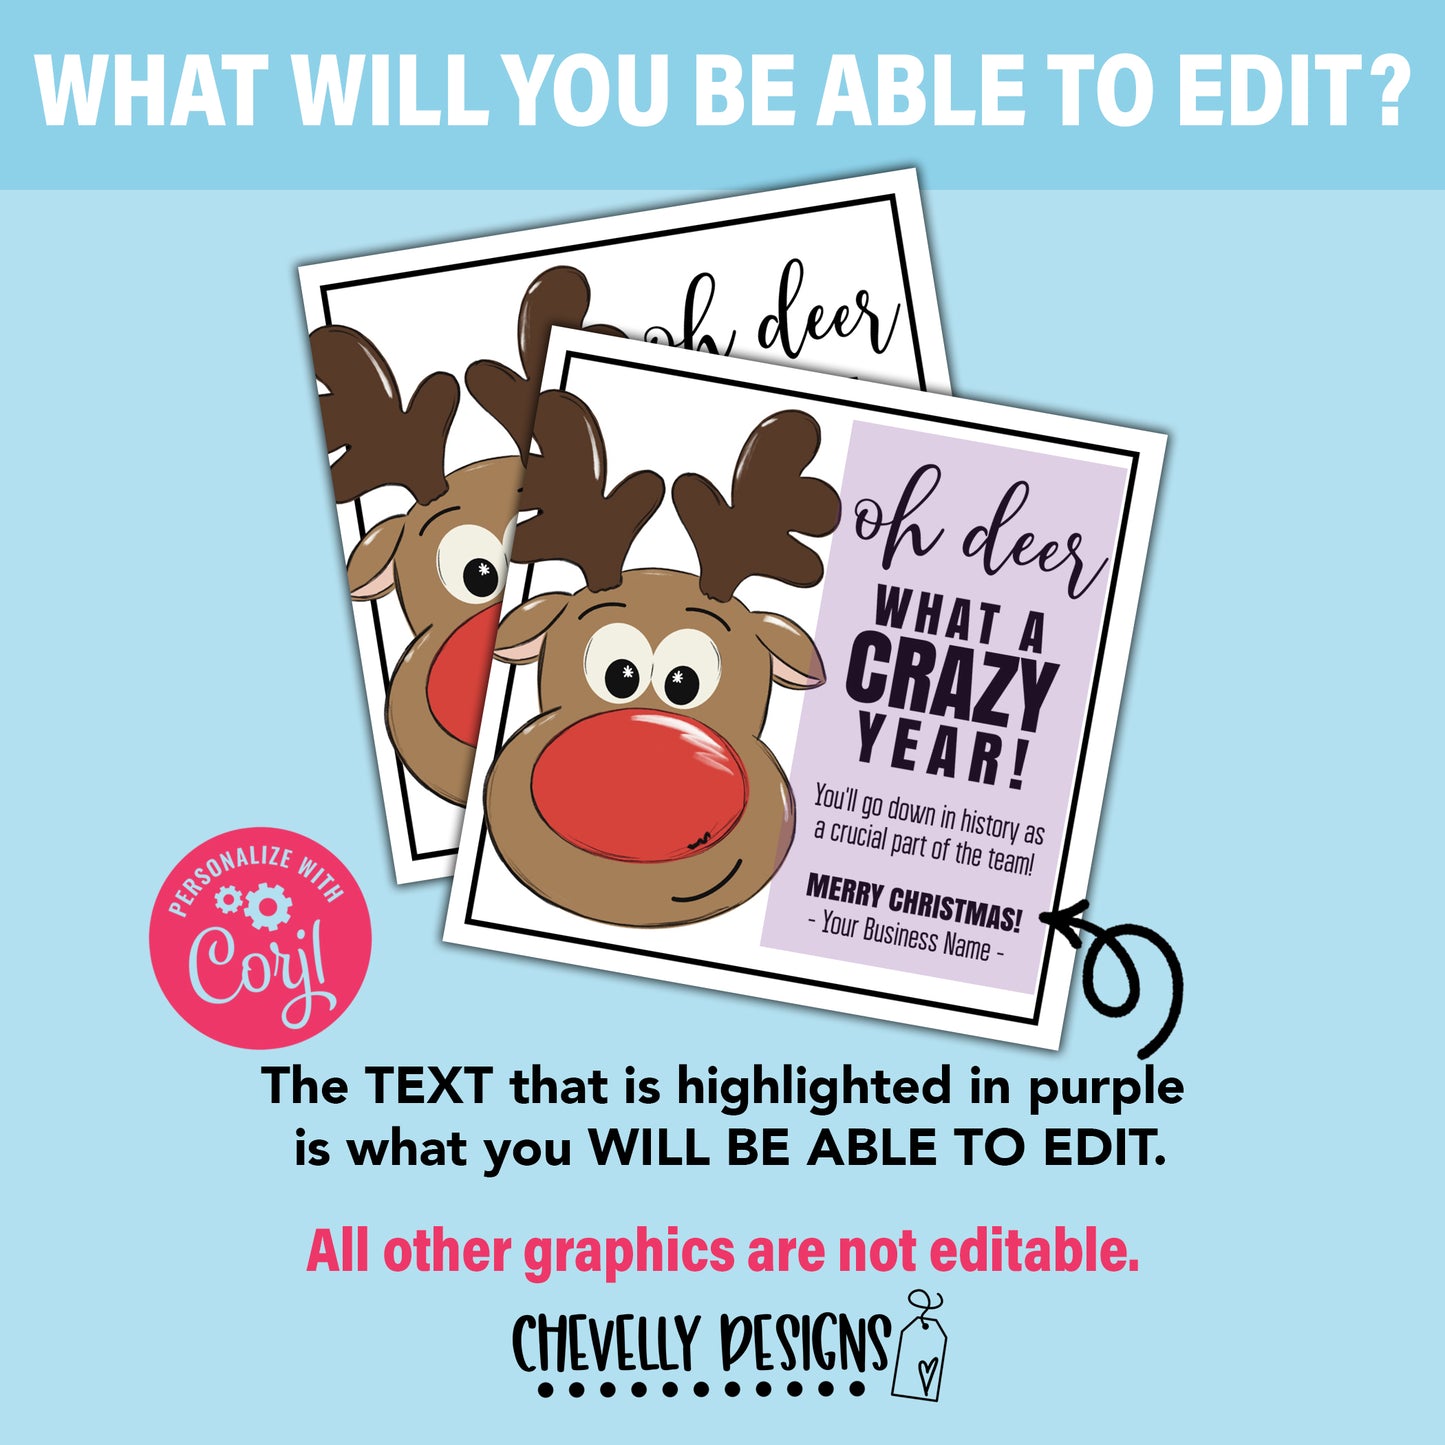 EDITABLE - Oh Deer What a Crazy Year - Christmas Staff Gift Tags - Printable Digital File